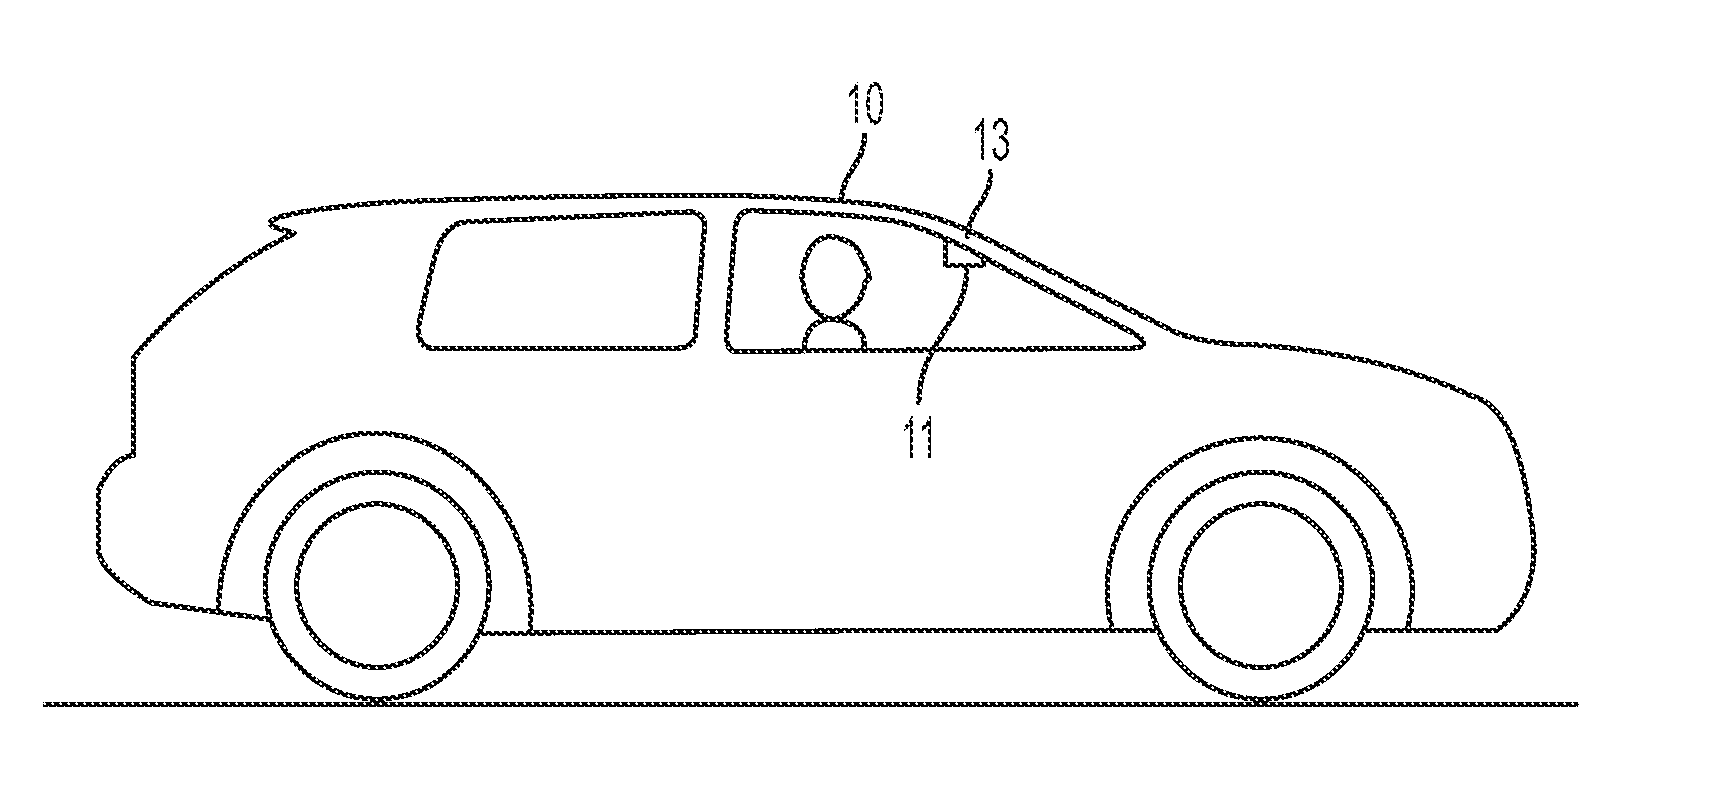 Vehicular camera with variable focus capability